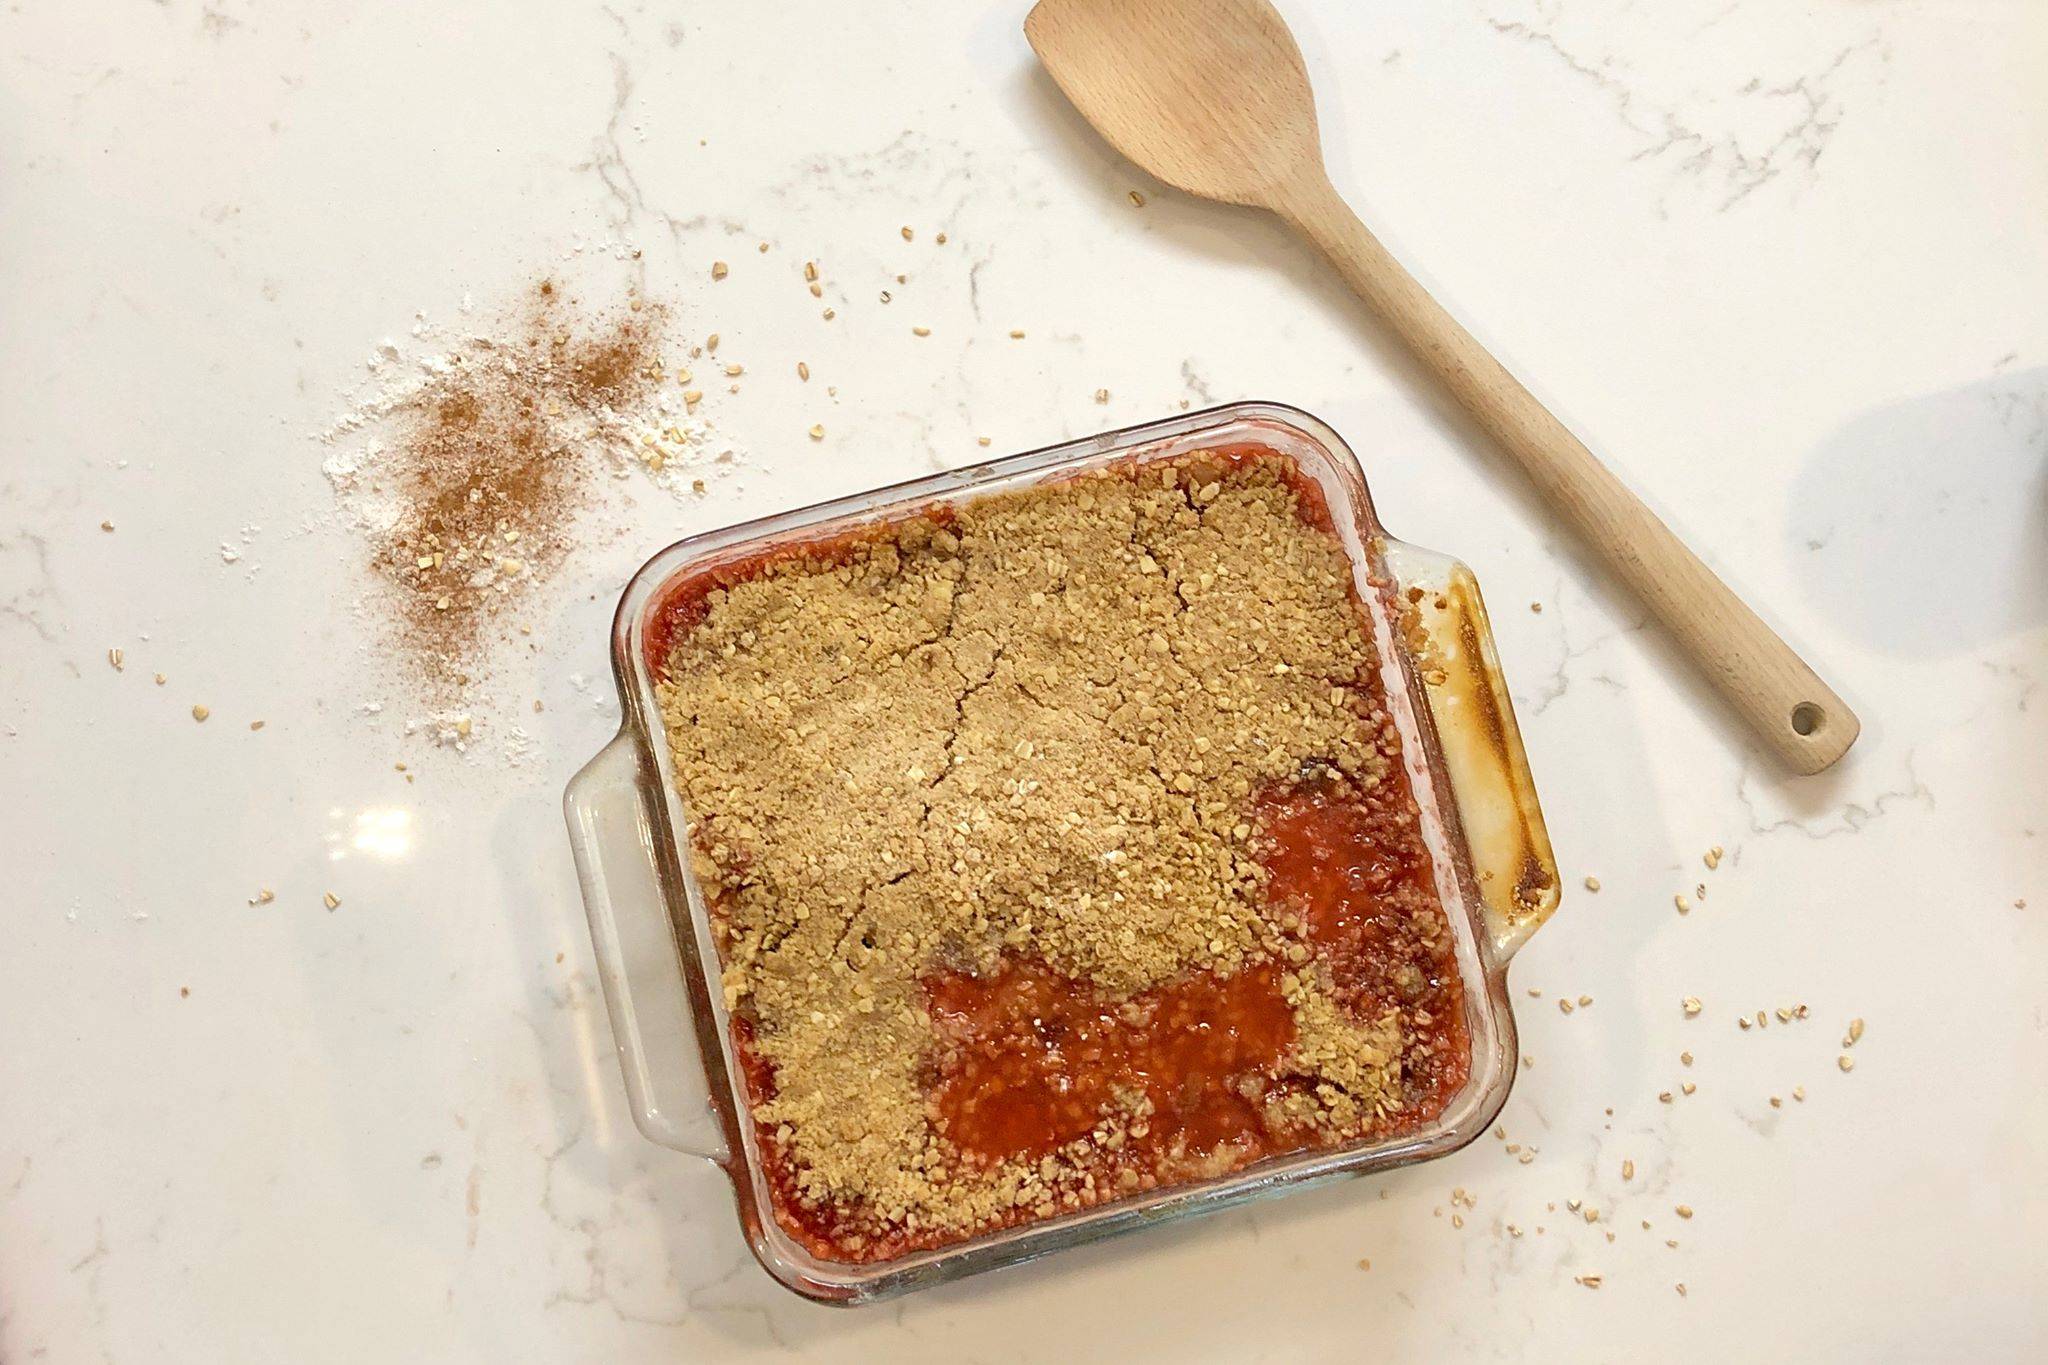 Rhubarb crumble is photographed on June 1, 2019, in Anchorage, Alaska. Rhubarb pairs well with sweet fruit like strawberries, and work well in desserts like strawberry rhubarb crumble. (Photo by Victoria Petersen/Peninsula Clarion)